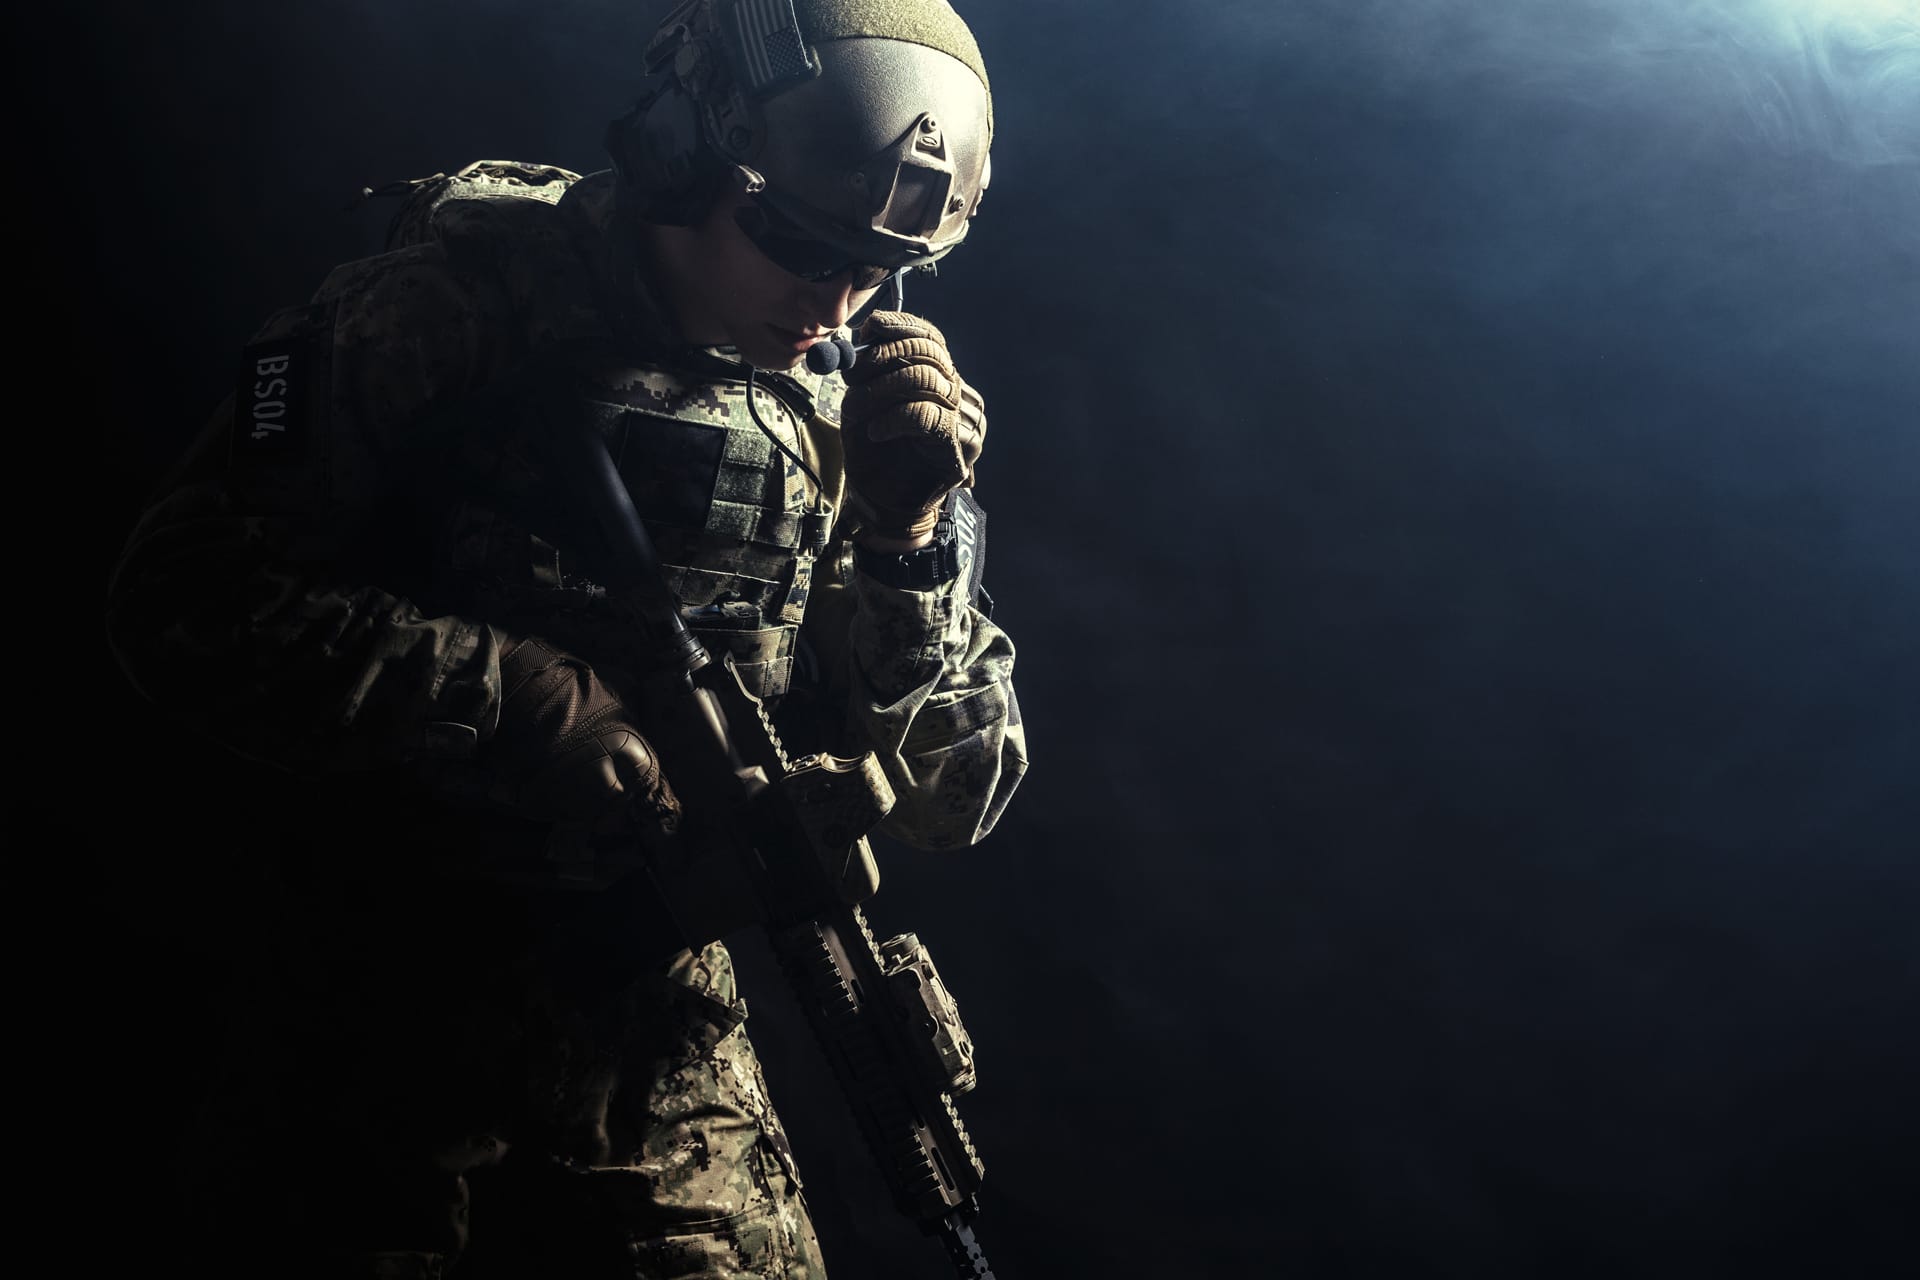 Special forces soldier with rifle excellent image